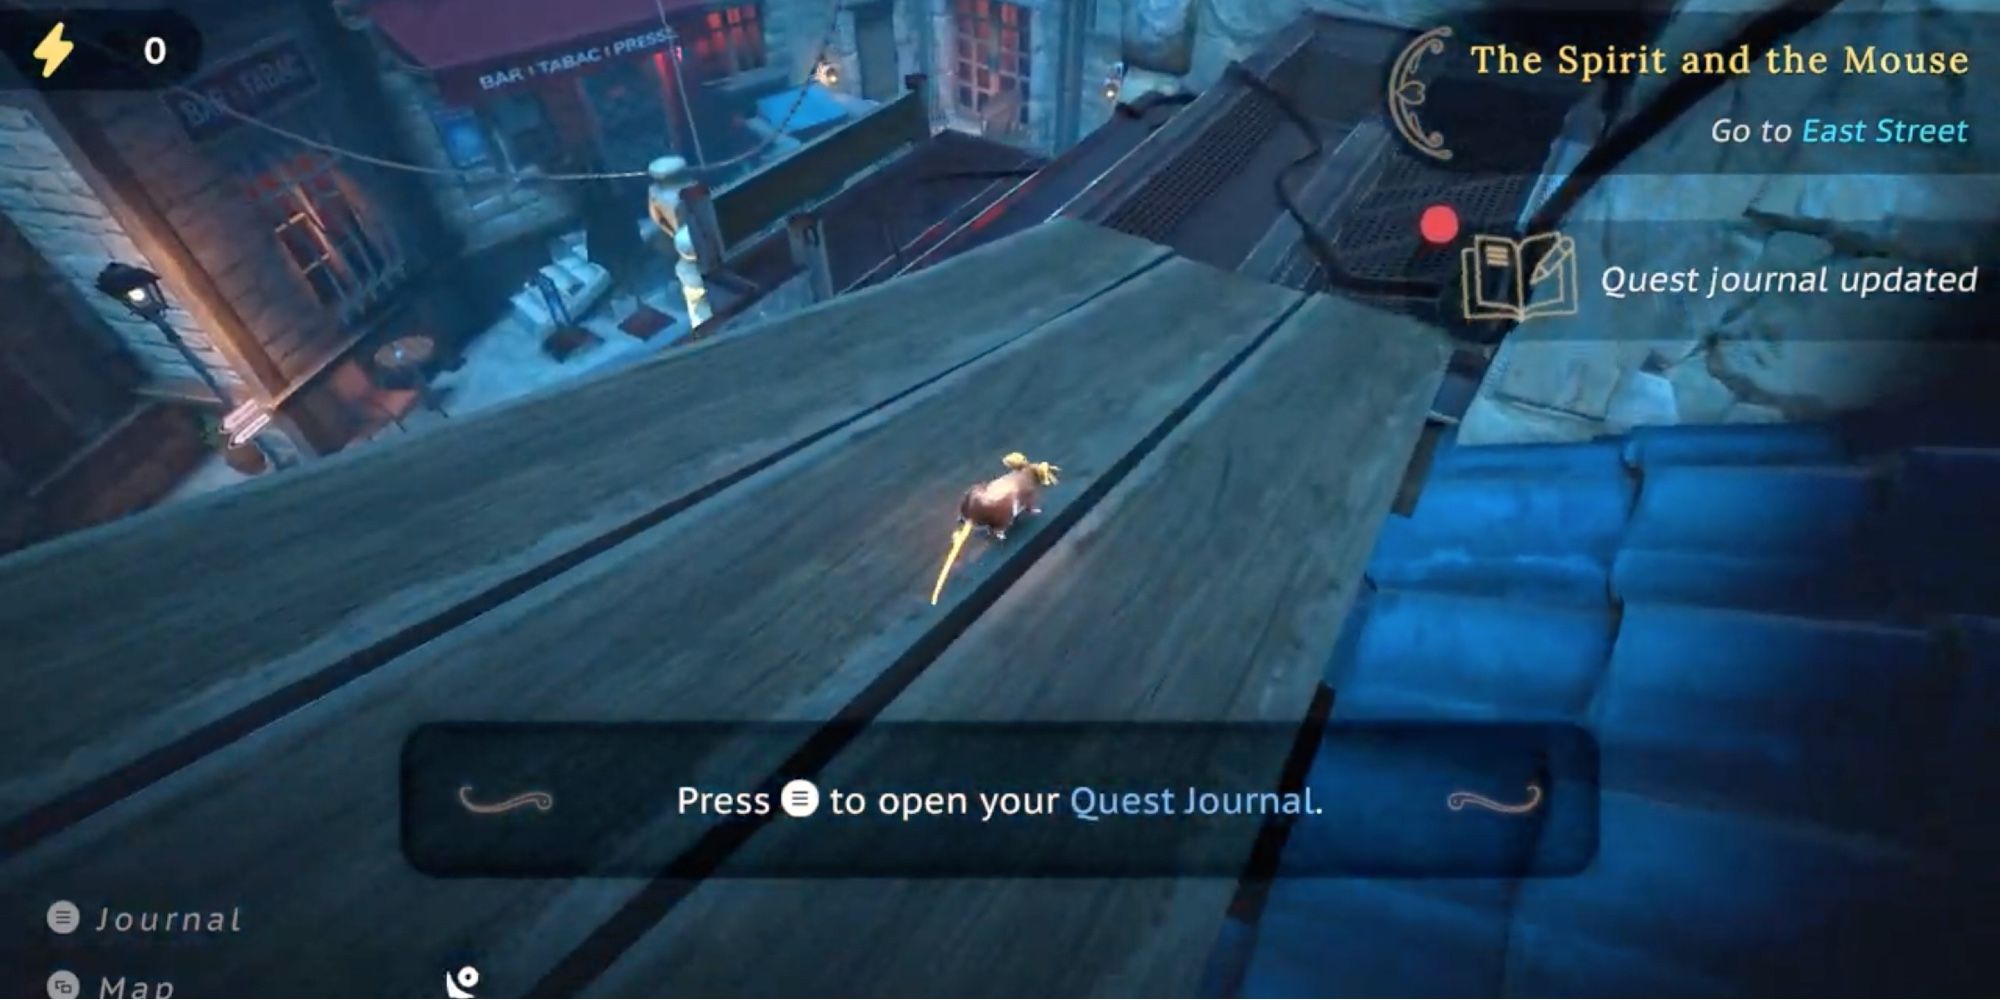 Player attempts to complete a quest in the game